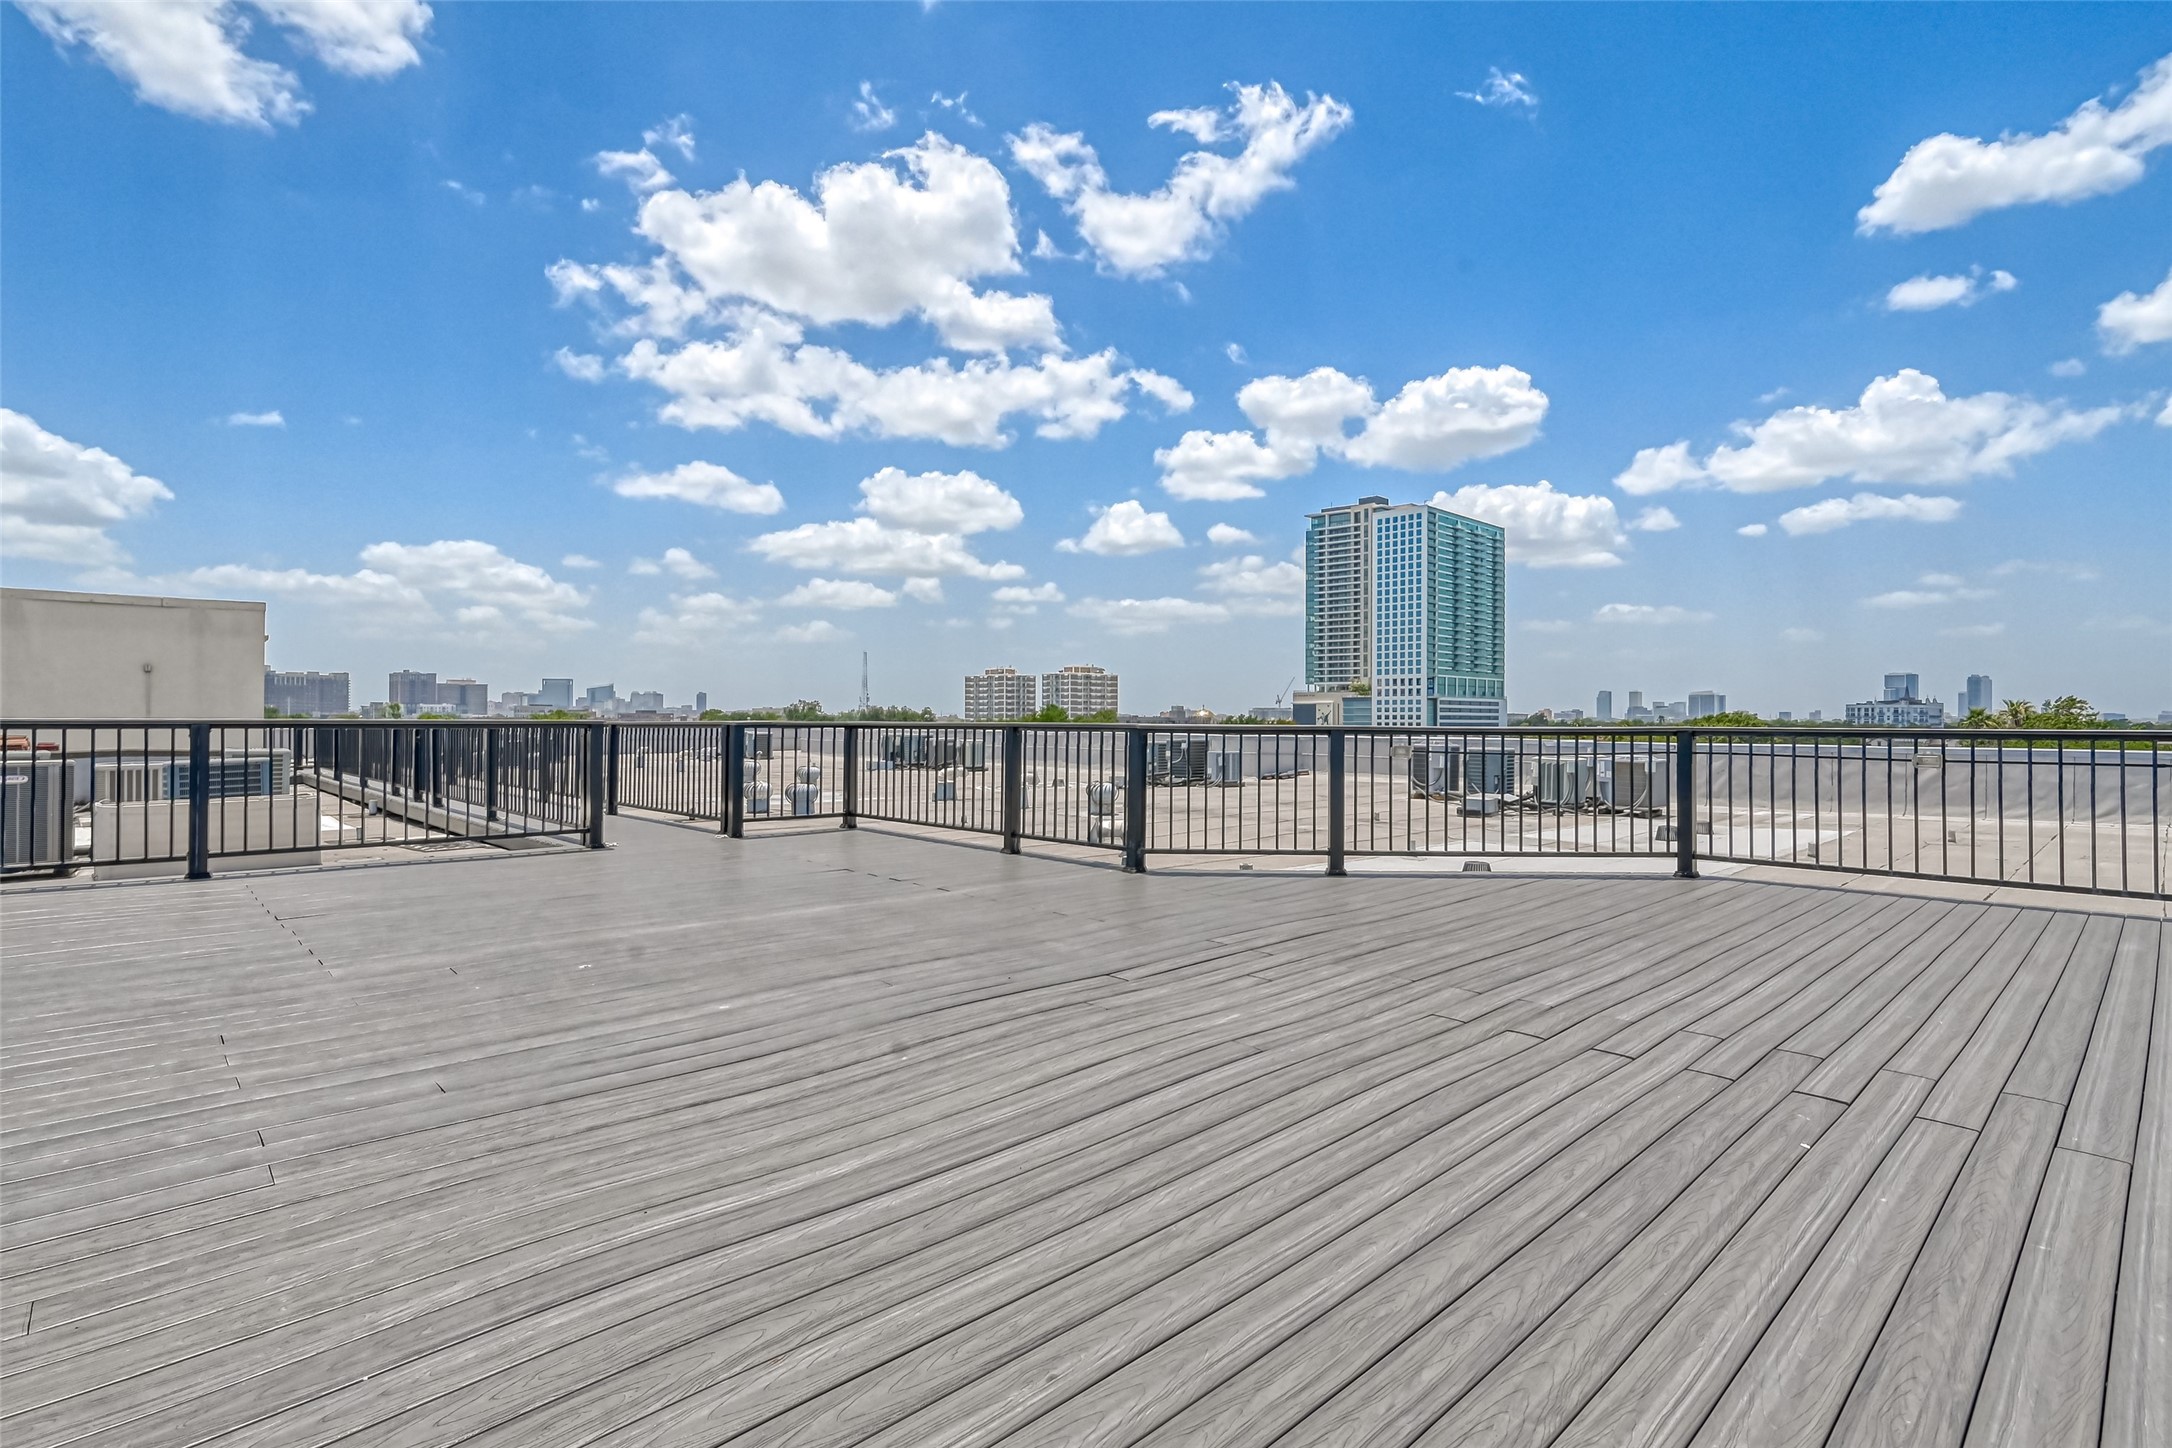 Standing on the patio and turning in a circle, you've got almost a 360-degree view of the city! This shows the view in the opposite direction from Downtown.